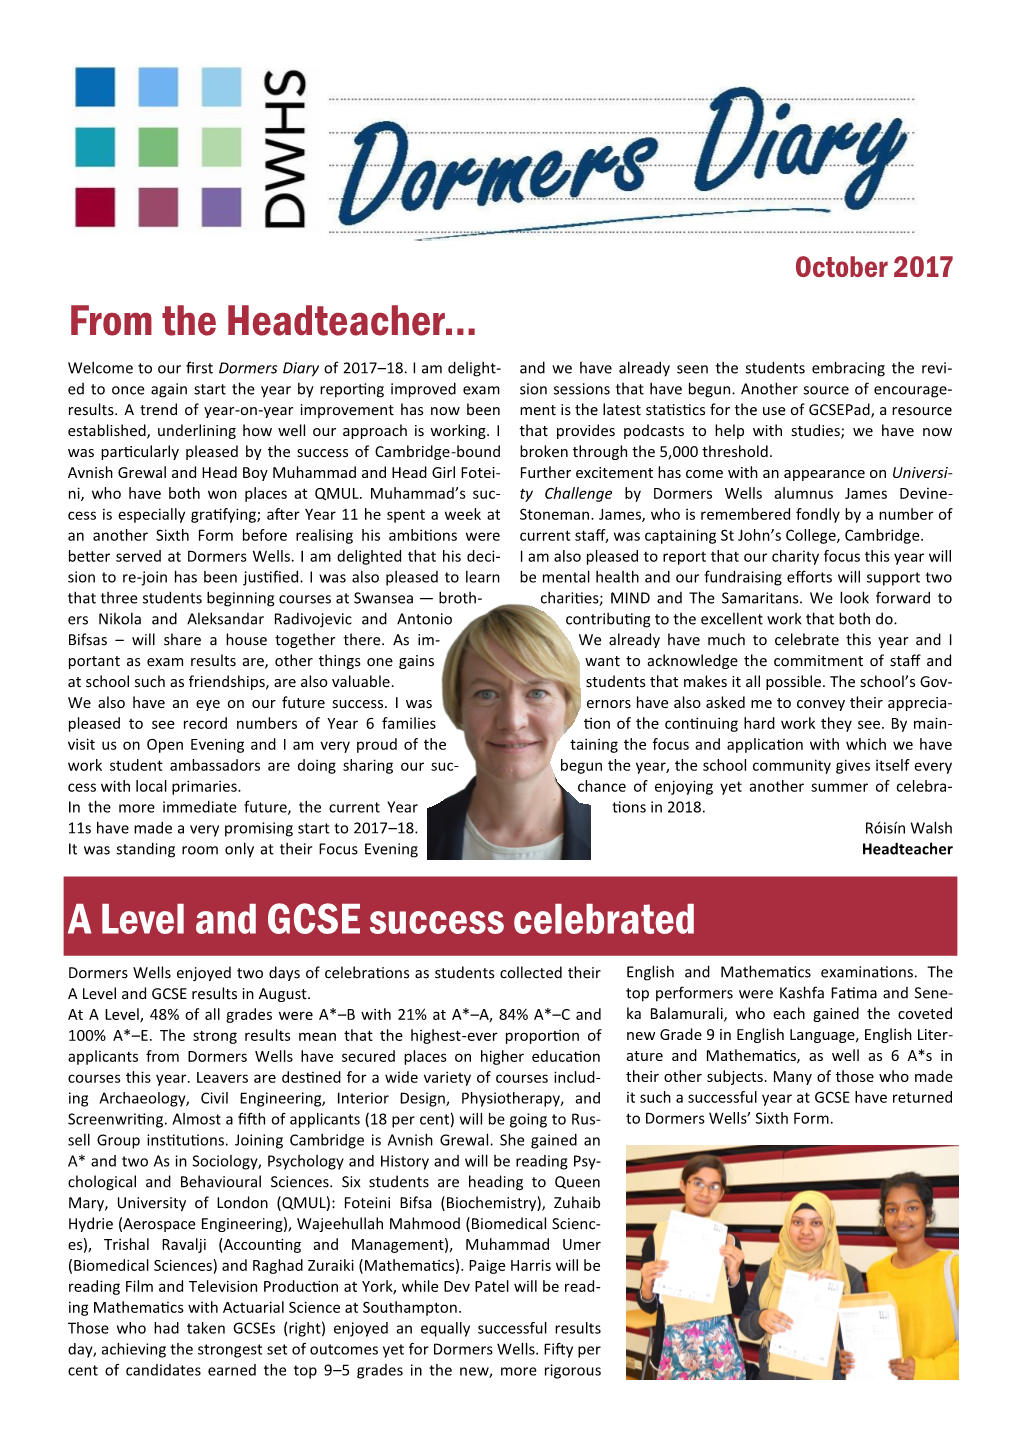 From the Headteacher... a Level and GCSE Success Celebrated